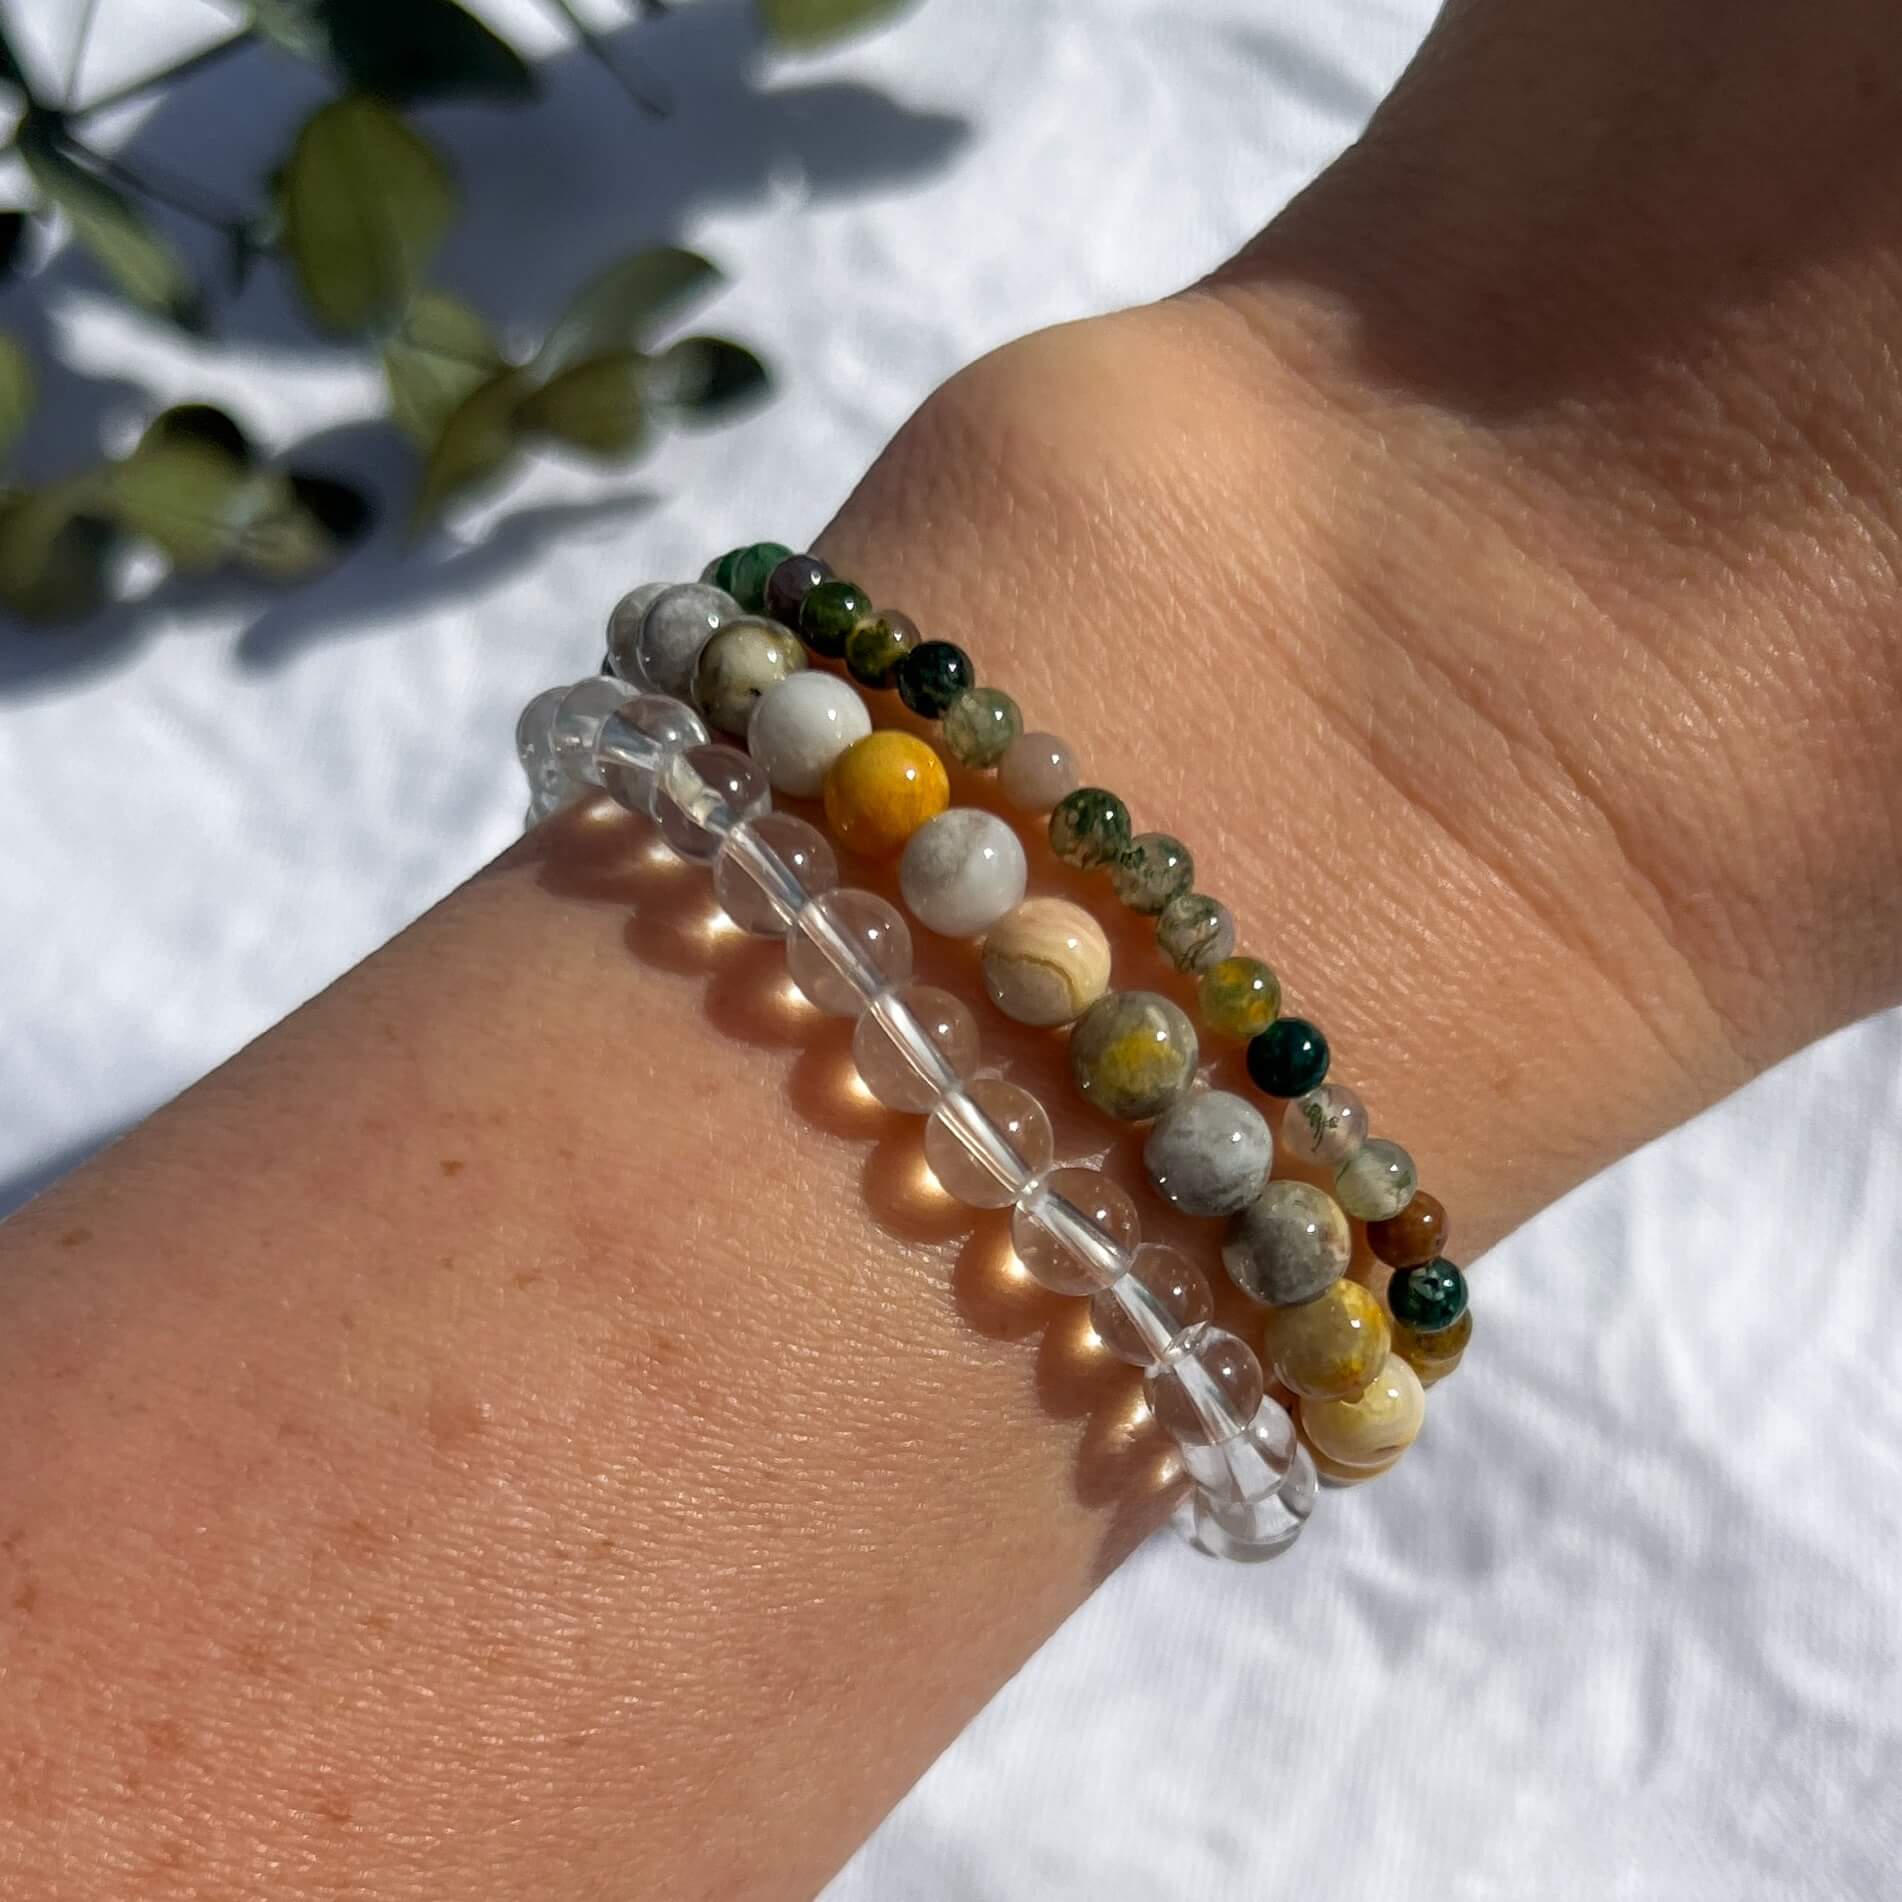 Cleanse and Clear Negative Energies Crystal Gemstone Bead Bracelet With  Malachite Healing Bracelet Soulcafe Gift Box and Tag S/M/L/XL - Etsy